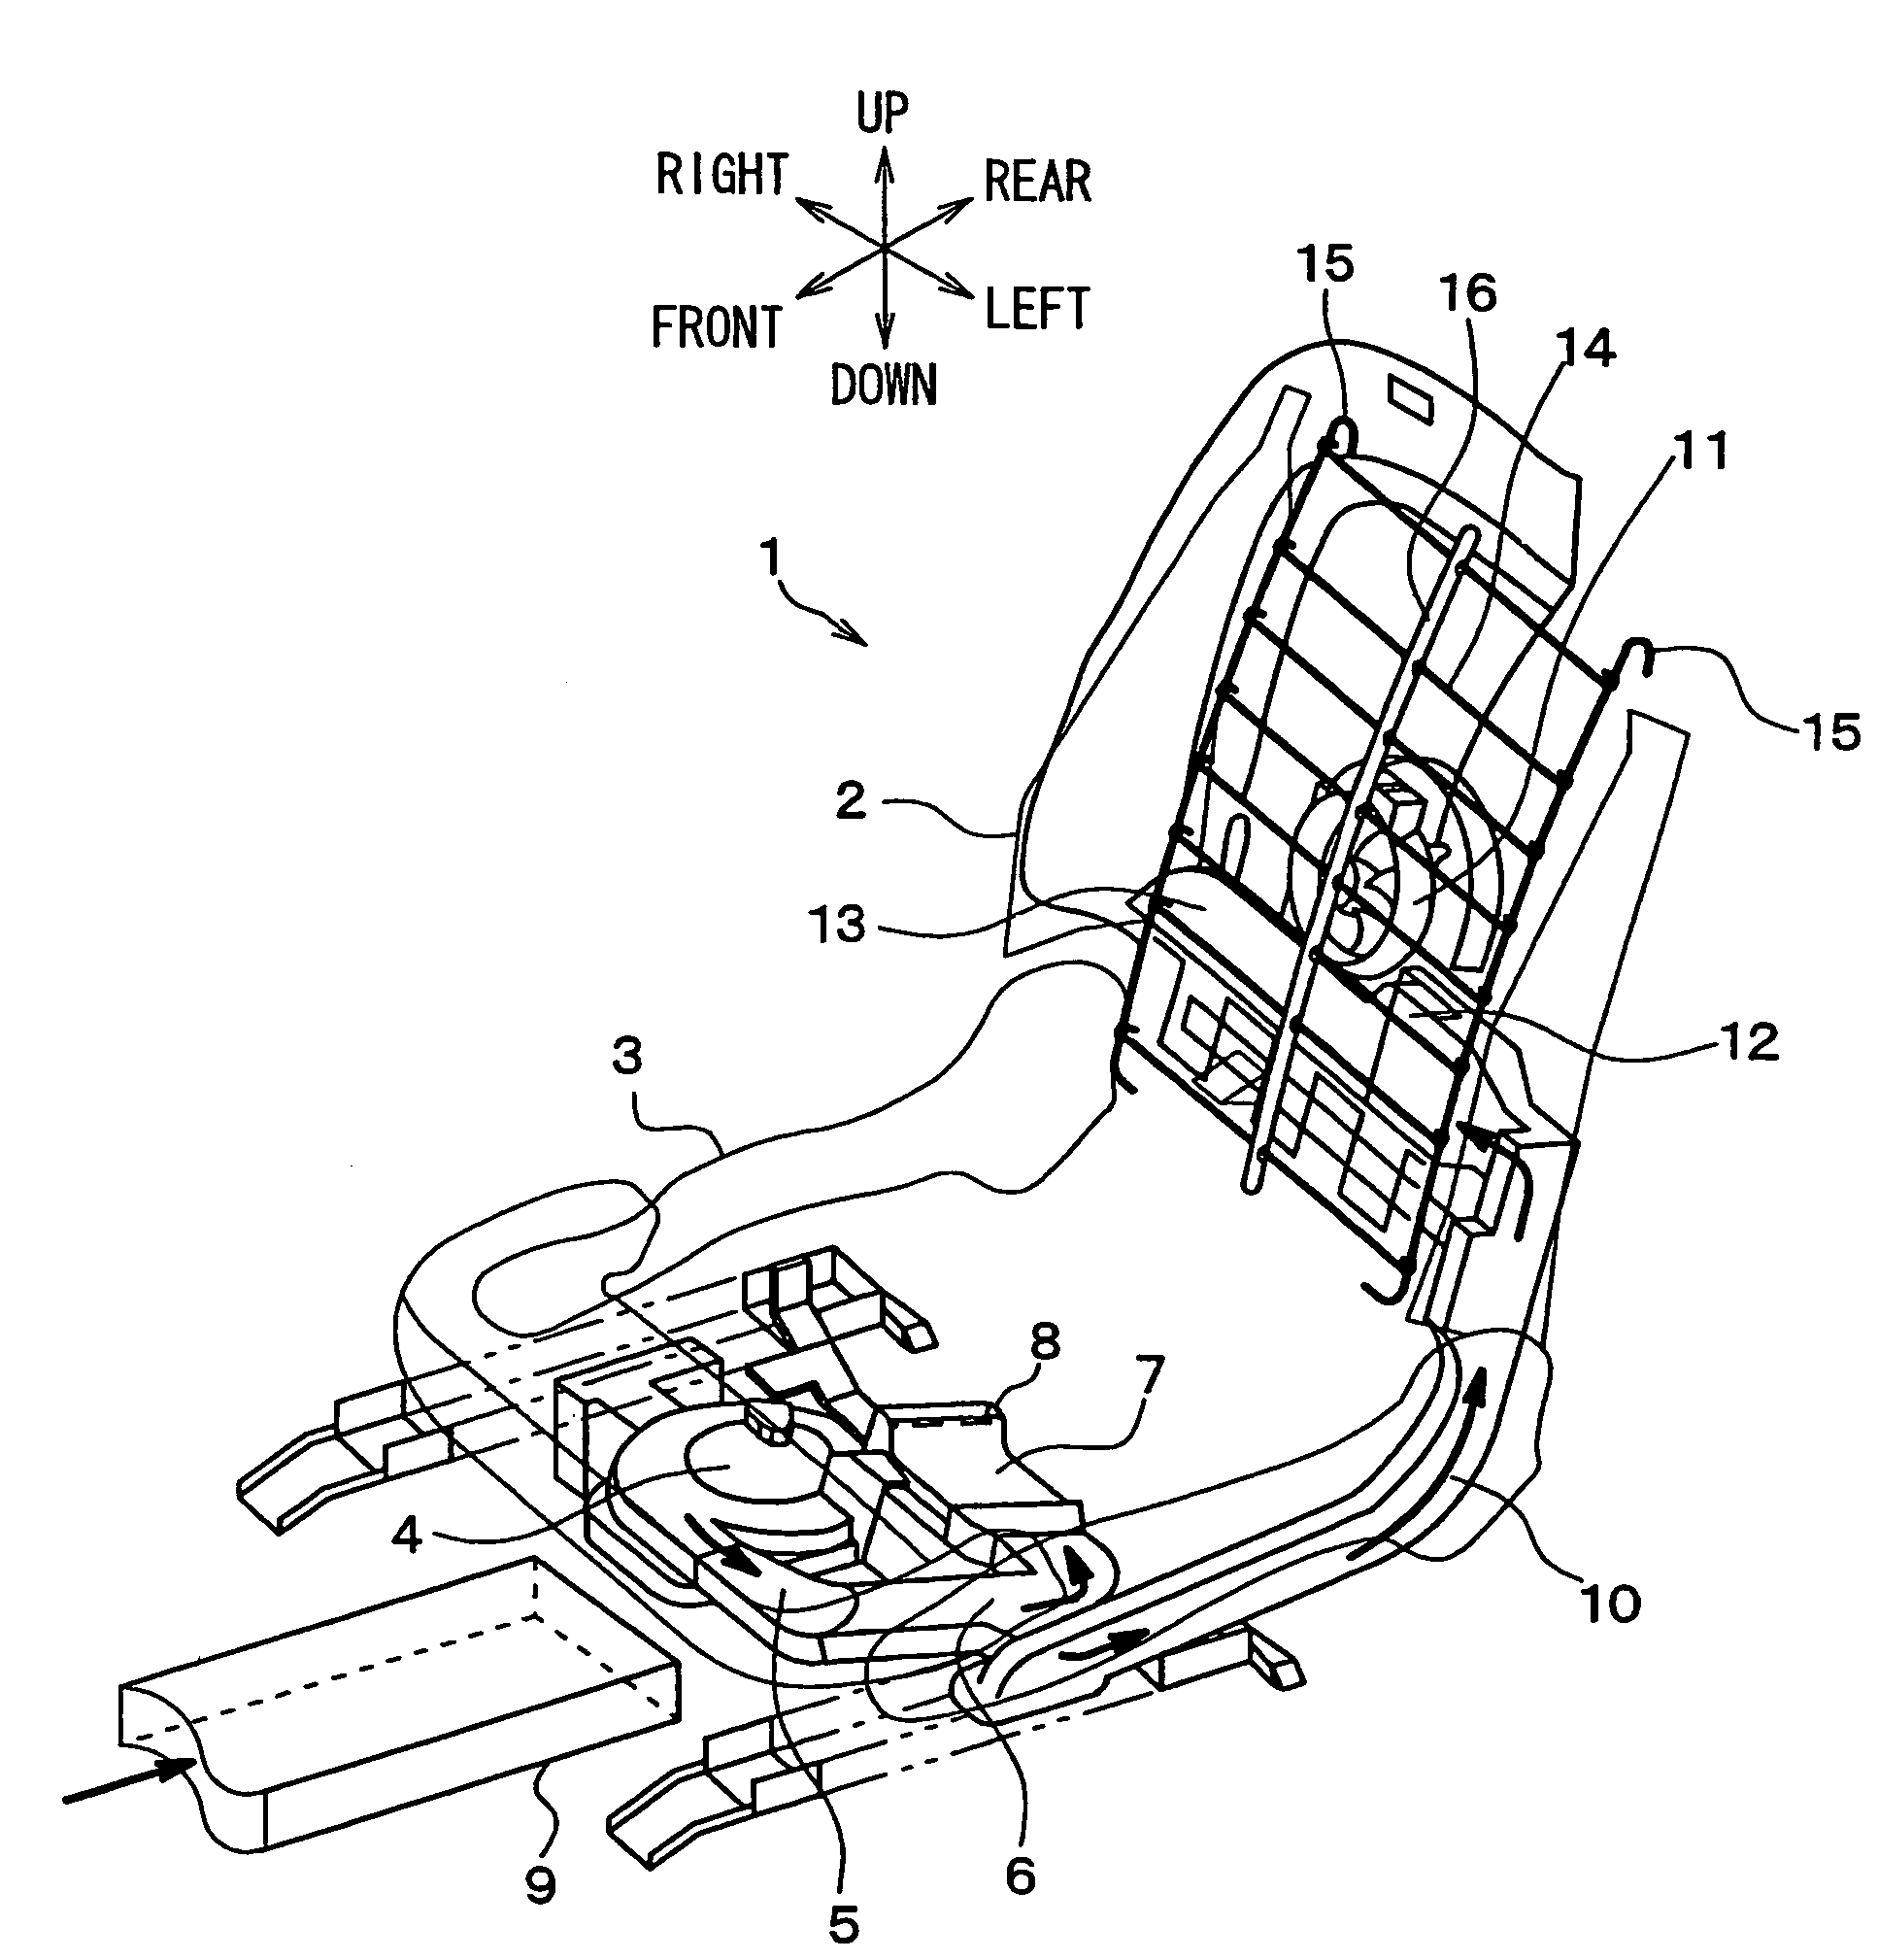 Air conditioning unit for seat